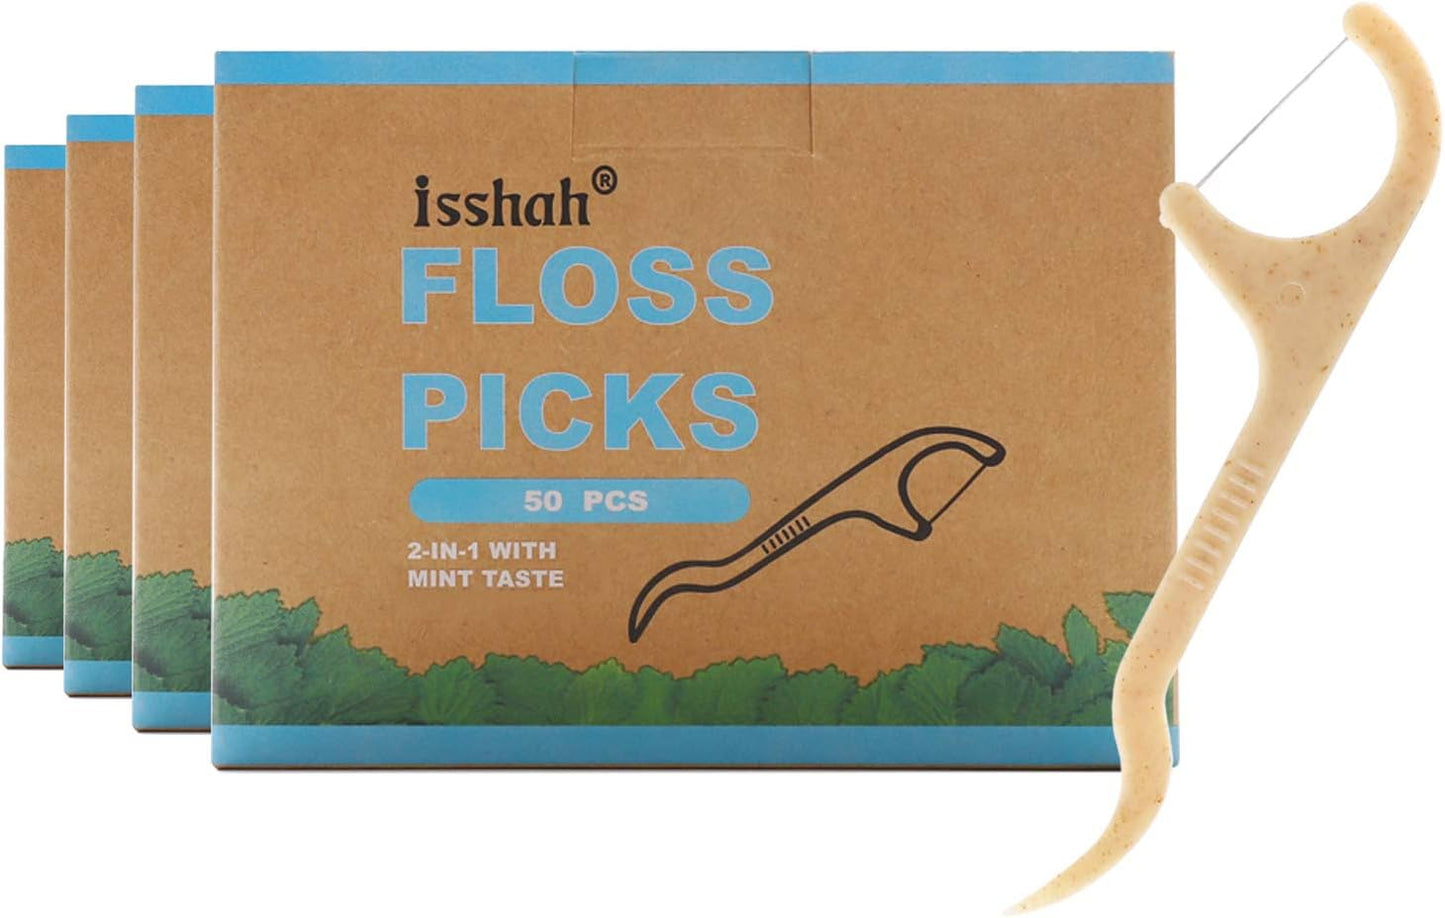 Natural Dental Floss Picks - 200 Count - BPA Free, Vegan, Sustainable, Eco Friendly, Natural Dental Flossers by Isshah (Mint)